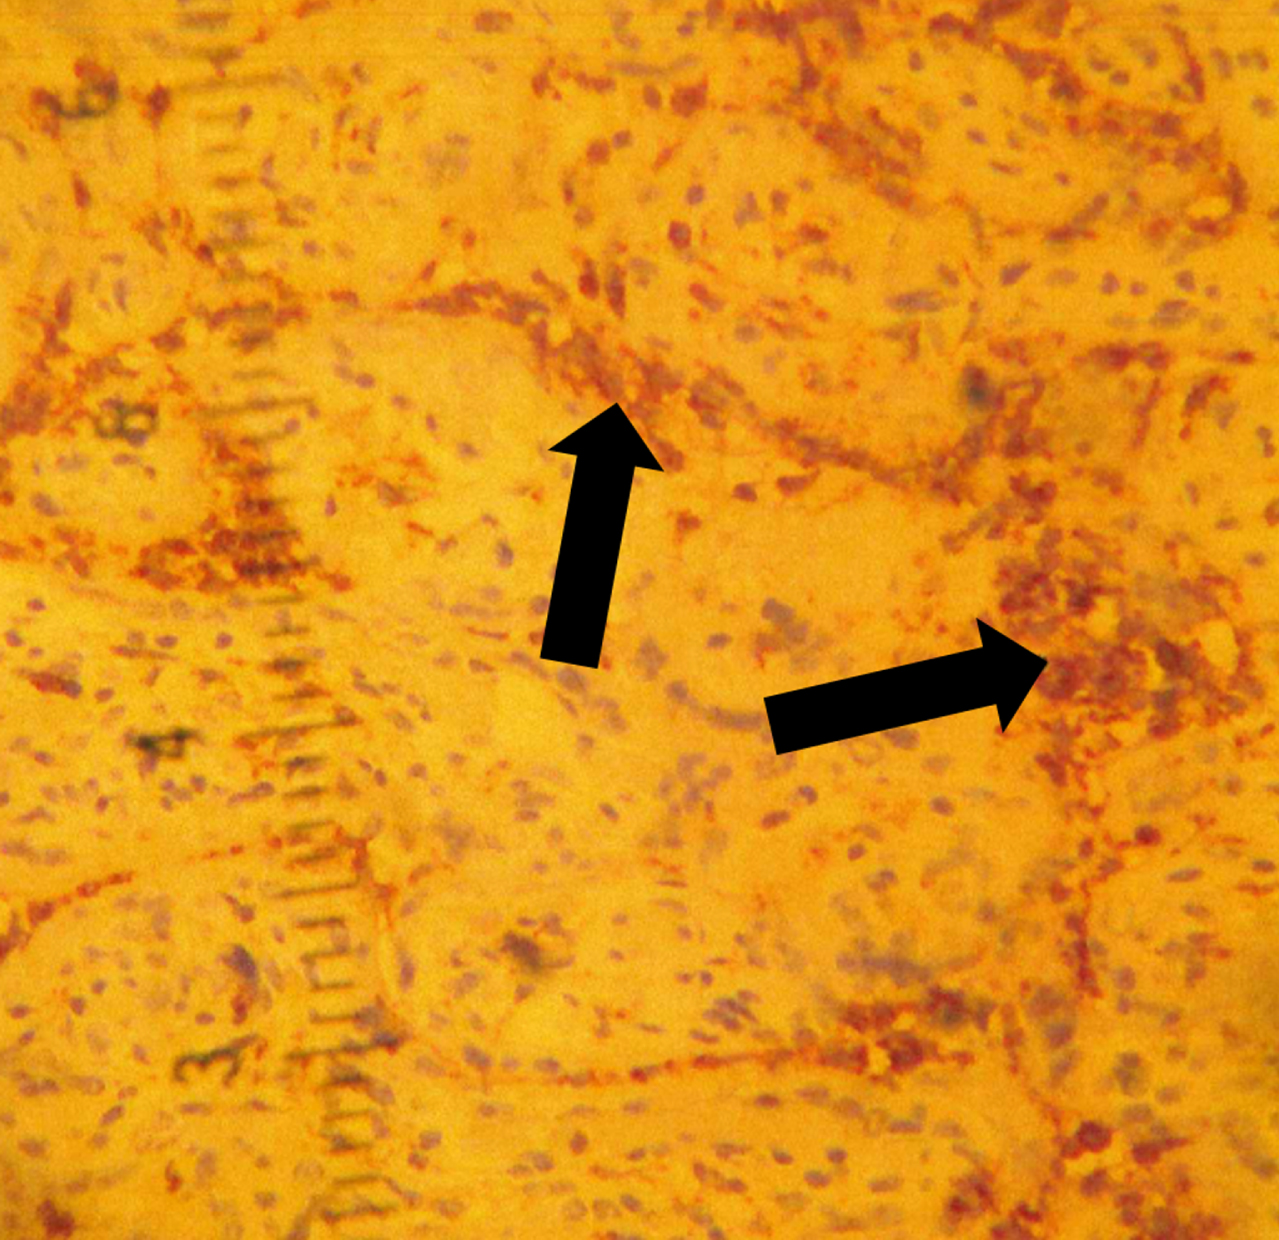 A. Placental histology shows histiocytic intervillositis highlighted by CD68 stain (arrows).